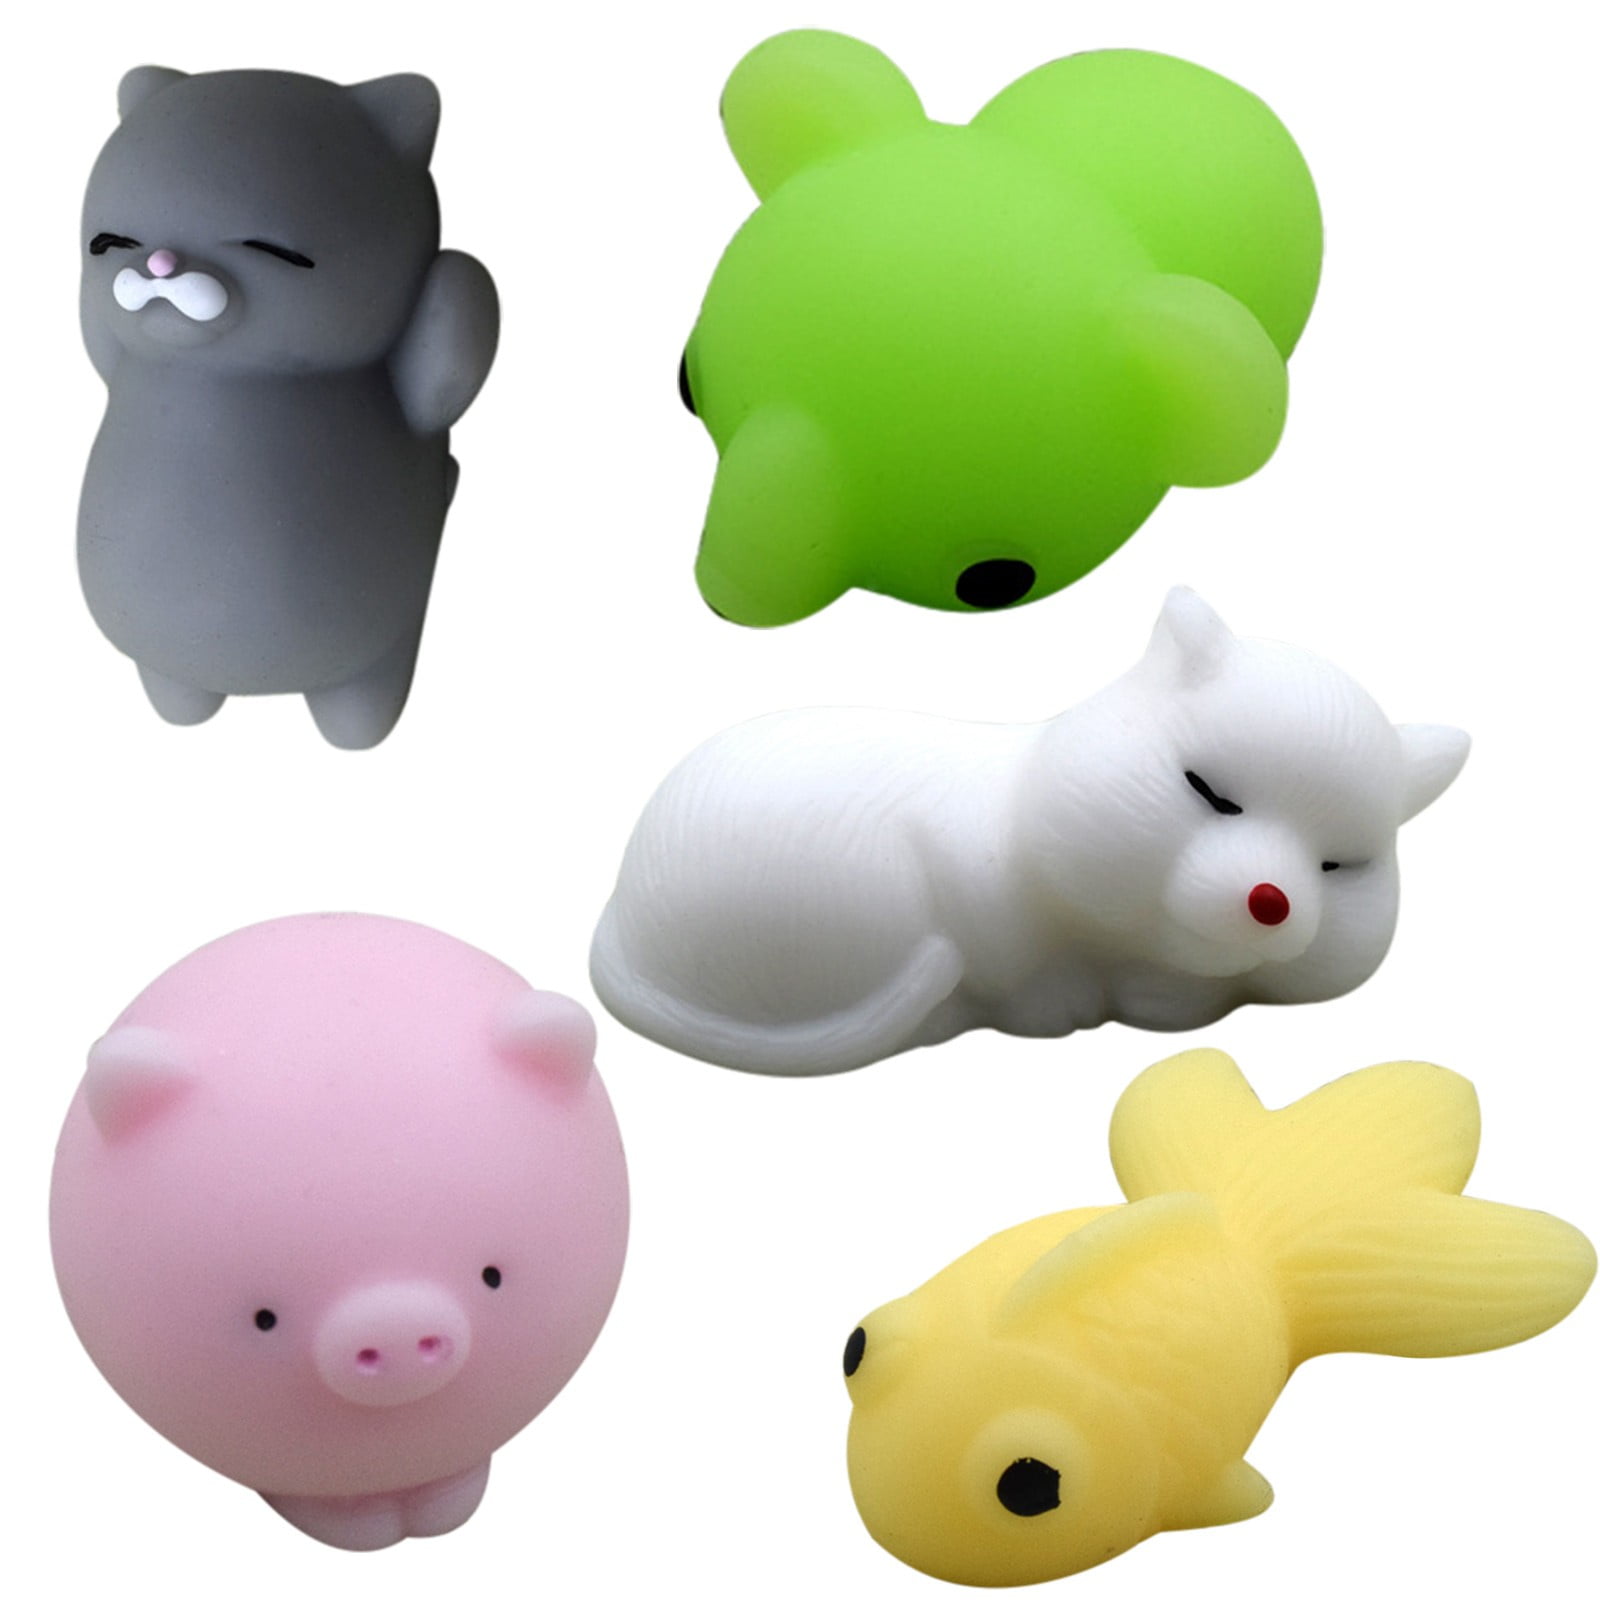 Mochi Squeeze Toys for Kids,Fidget Toys Mochi Dog Decompression Slow Re Bound Toys,Decompression Toys Dolls Relieve Stress WDNM Soft Rubber Sensory Fidget Toy,Fidget Toys Pop It,Fidget Toys Cheap